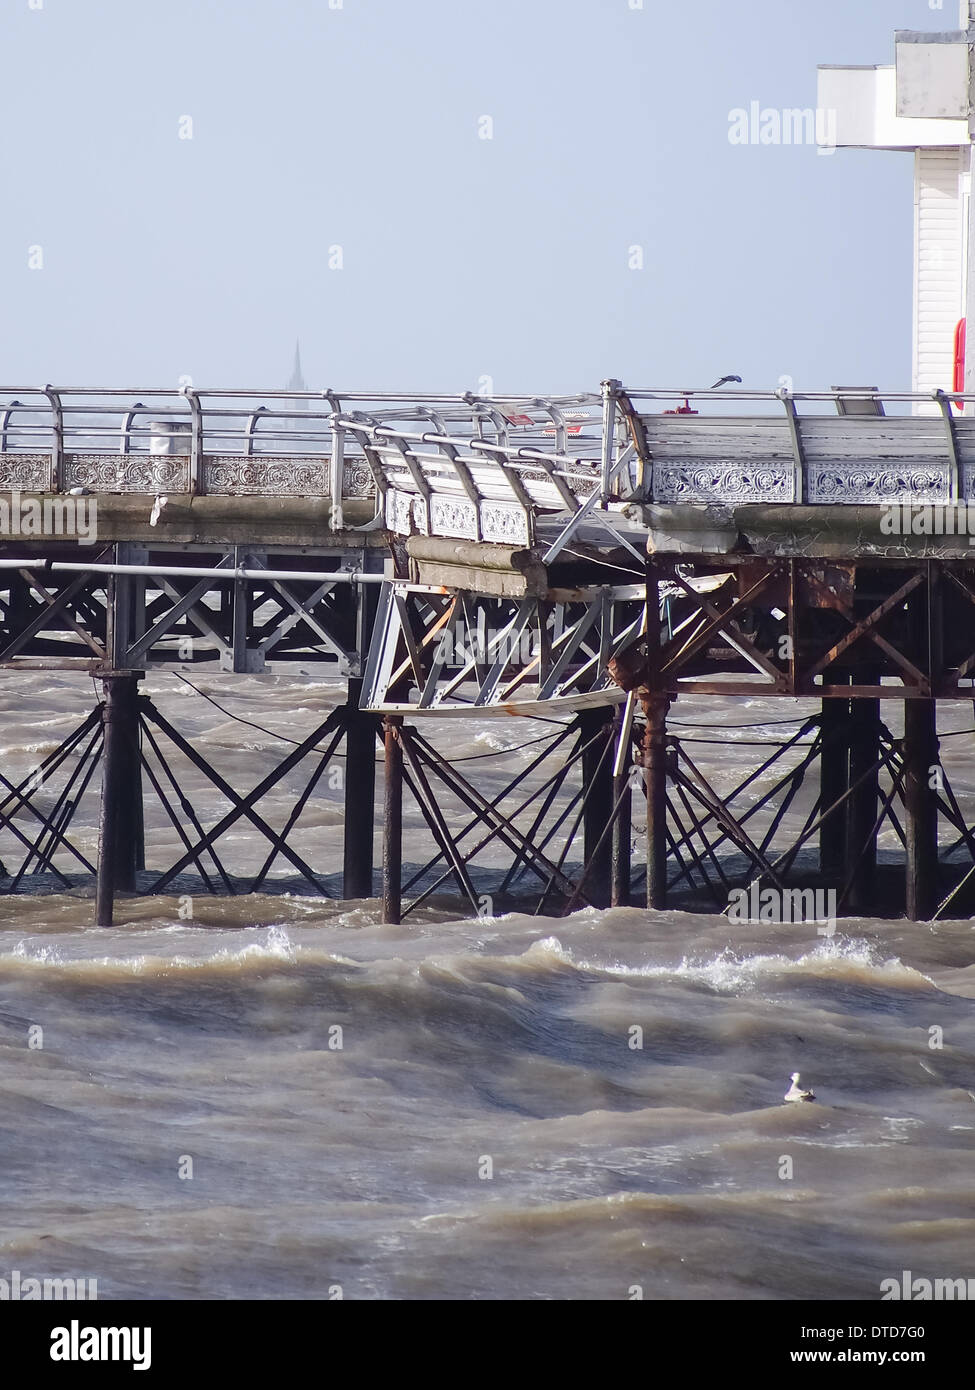 Portsmouth, Hampshire, England 15th February 2014.  South Parade Pier has been damaged by strong winds and large waves, leaving pieces of the Georgian structure hanging from the side of the pier. The pier has been closed to the public for over a year due to structural safety issues Credit:  simon evans/Alamy Live News Stock Photo